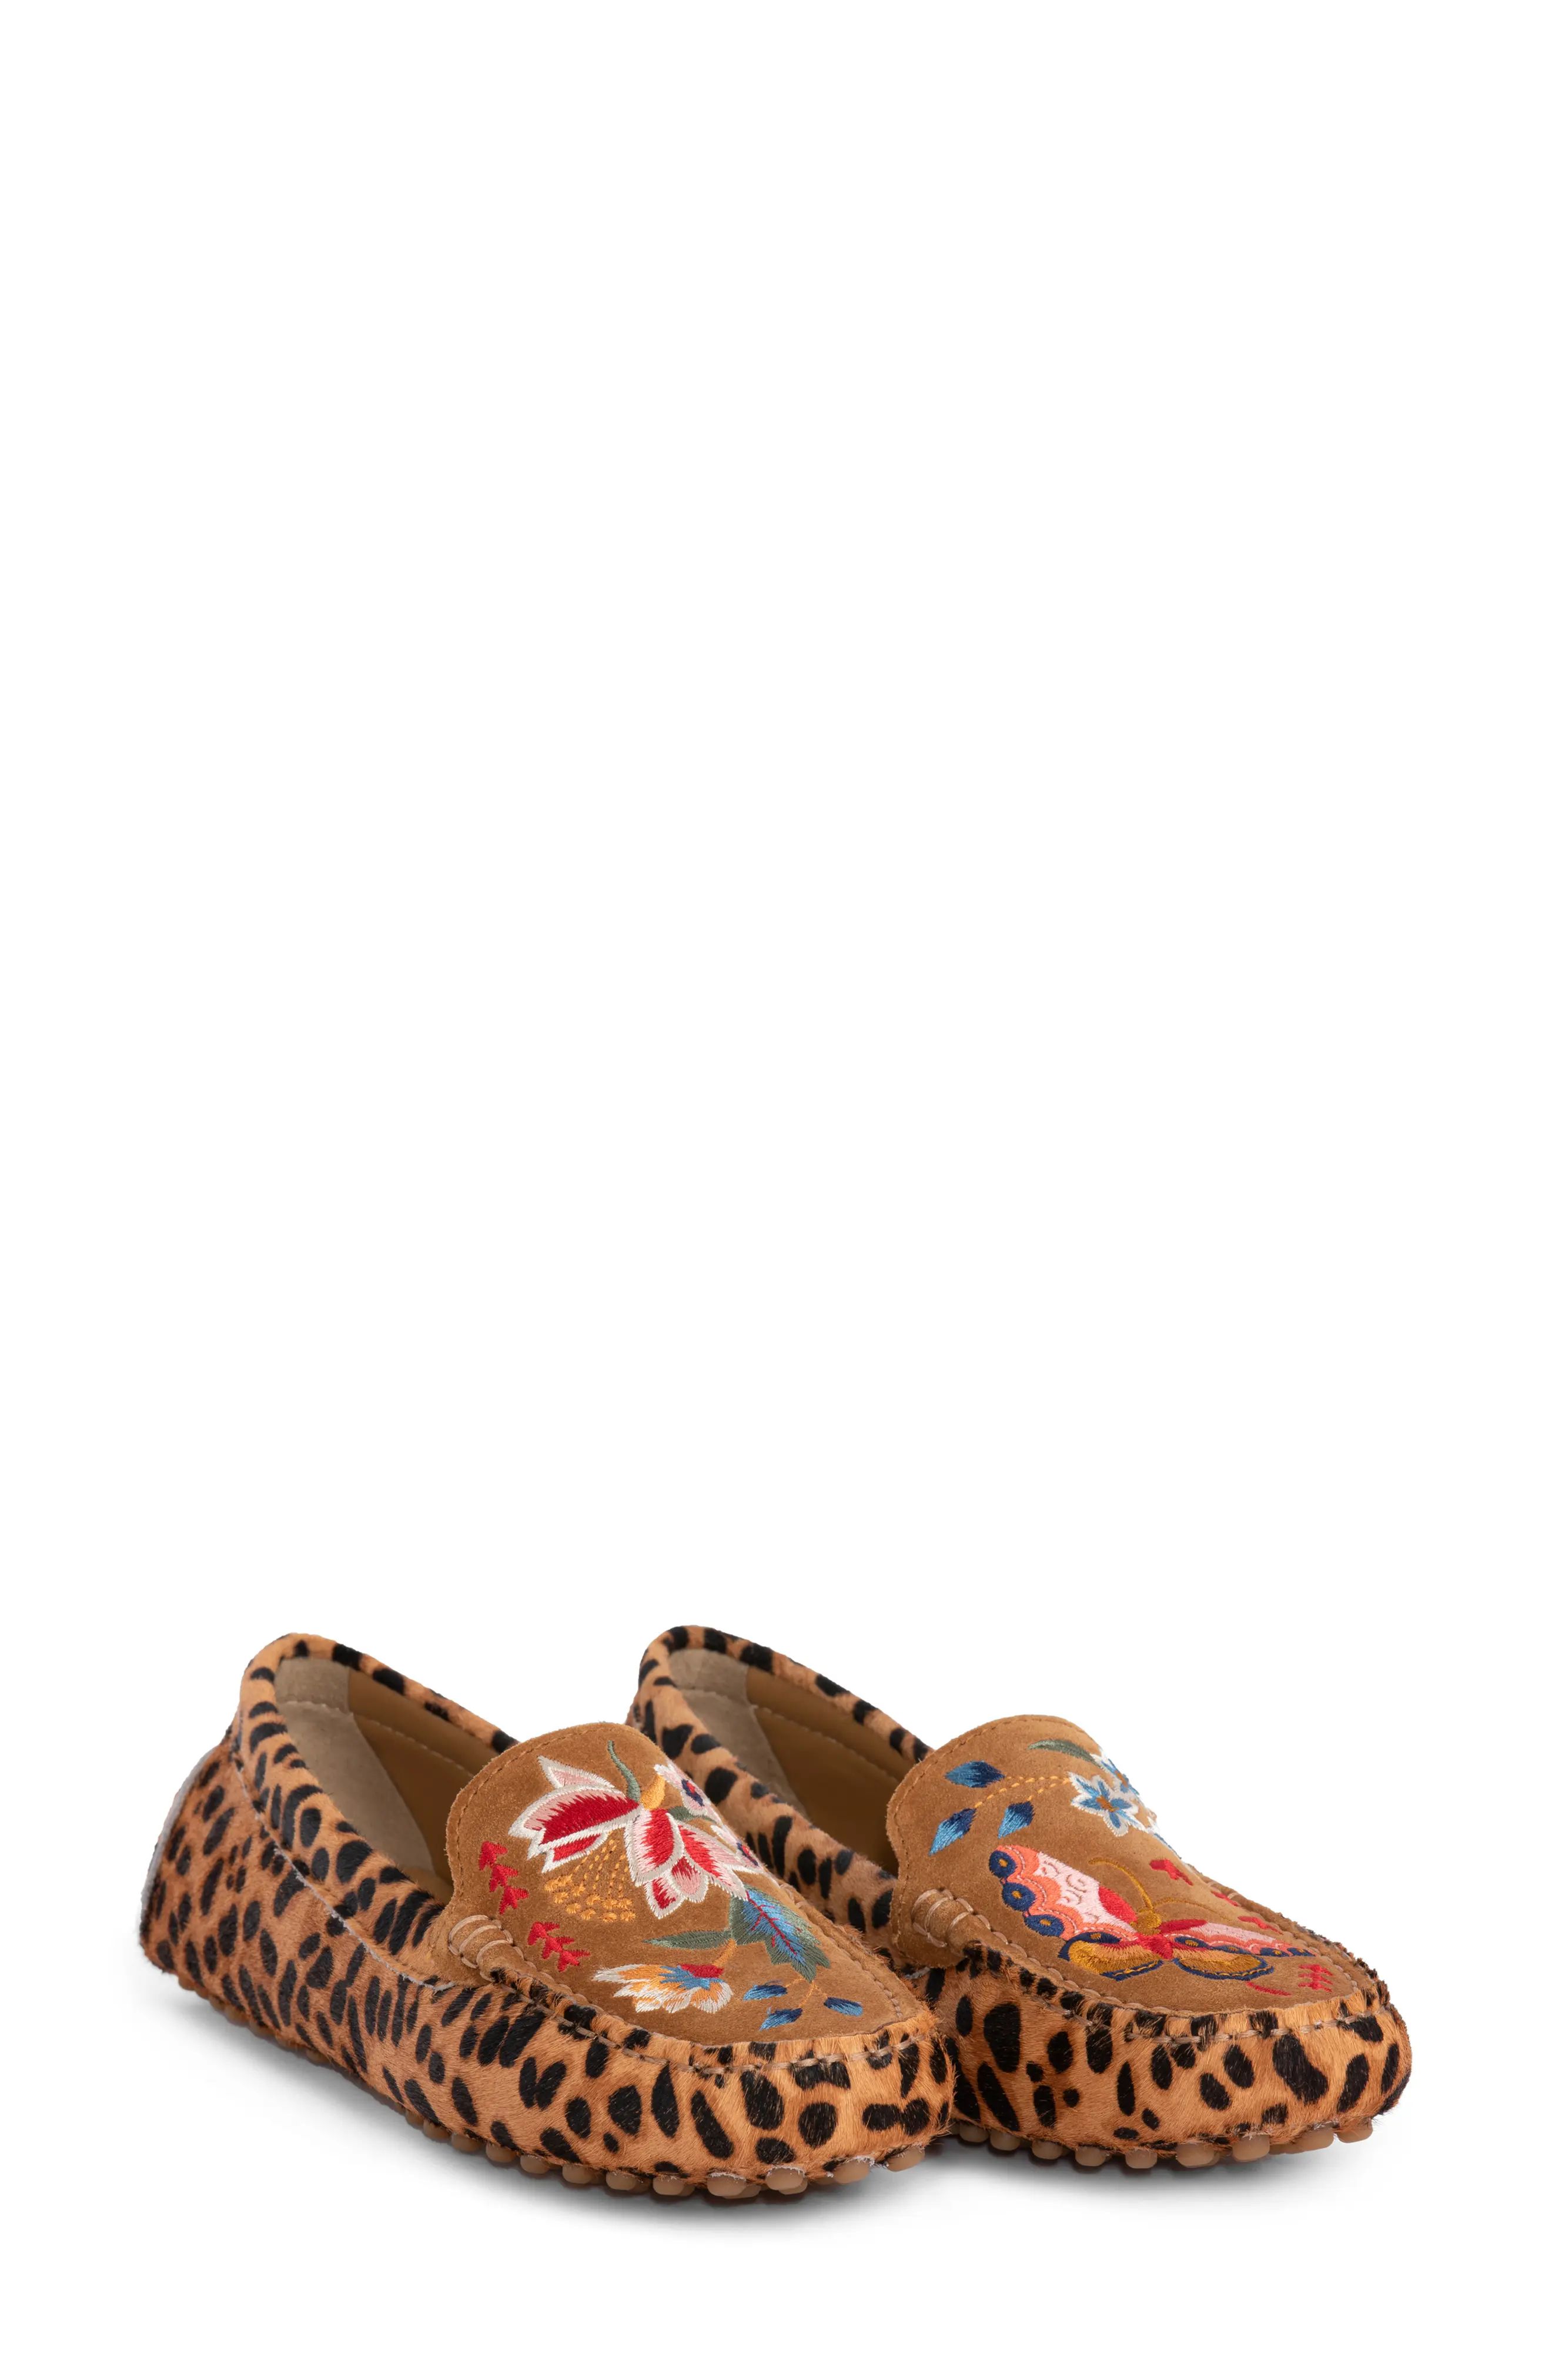 Johnny Was Taline Leopard Print Genuine Calf Hair Moccasin in Multi at Nordstrom, Size 9.5 | Nordstrom